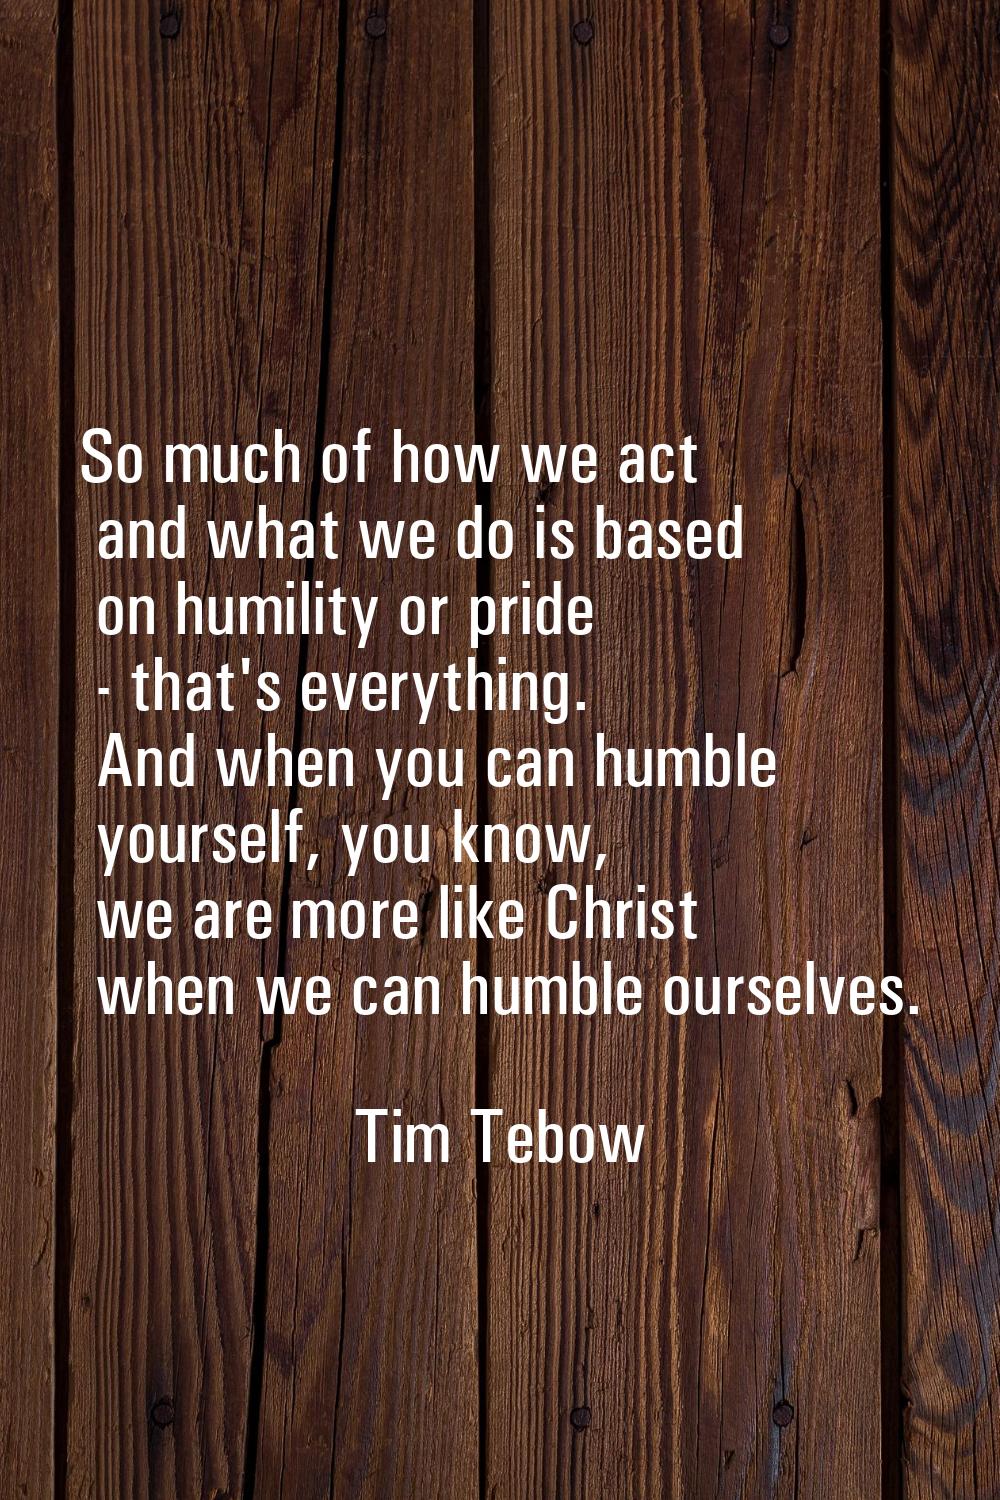 So much of how we act and what we do is based on humility or pride - that's everything. And when yo